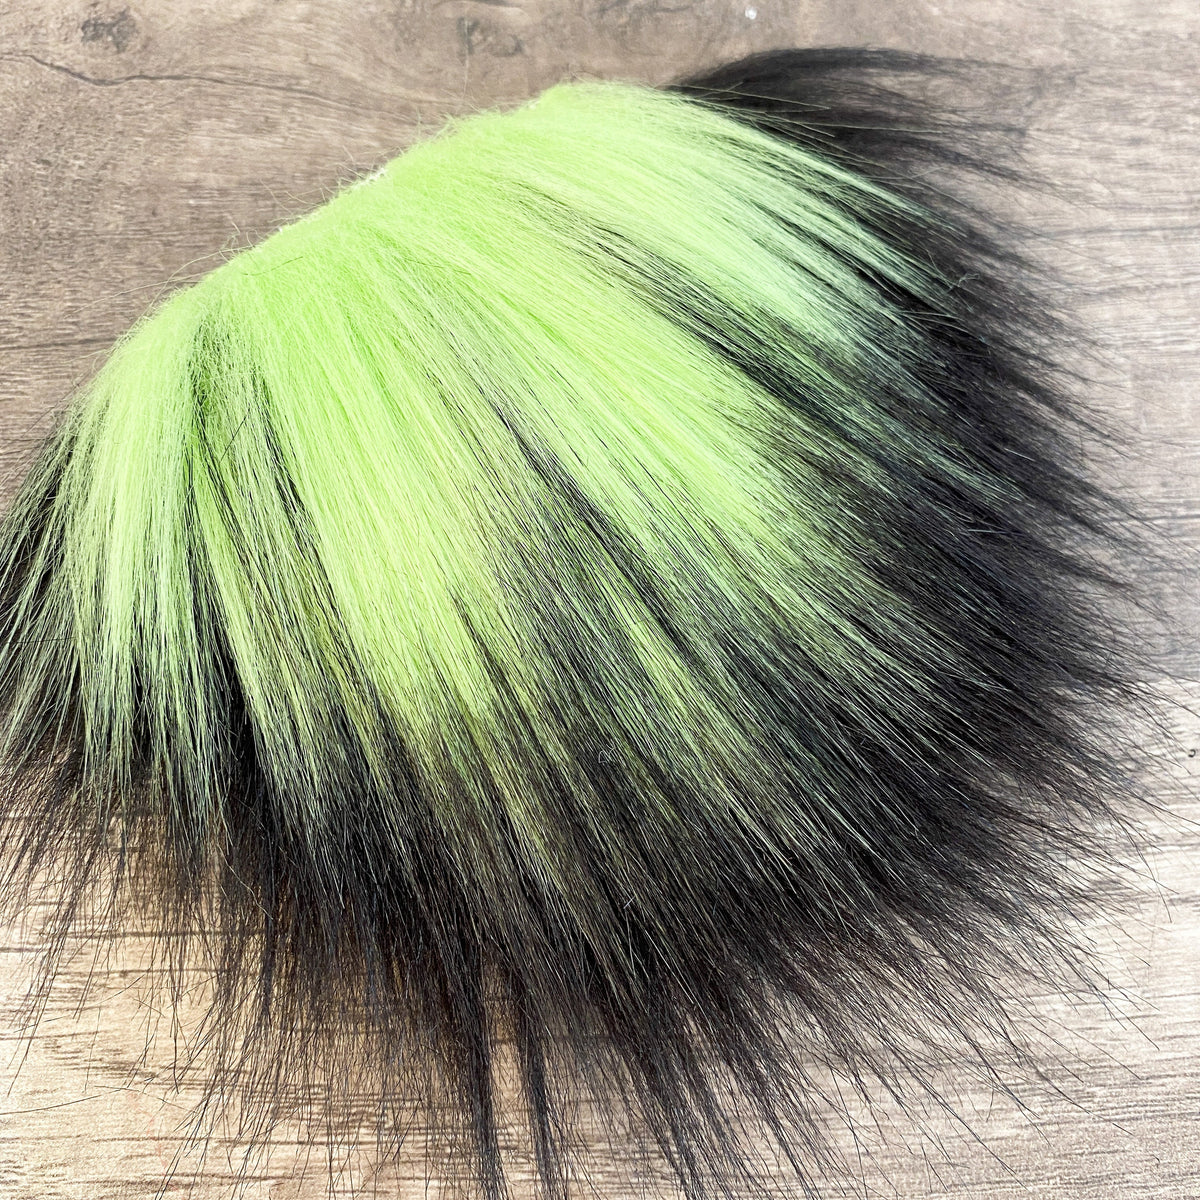 Two Piece Layered Gnome Beard - Black-Tipped Green Over Straight Black